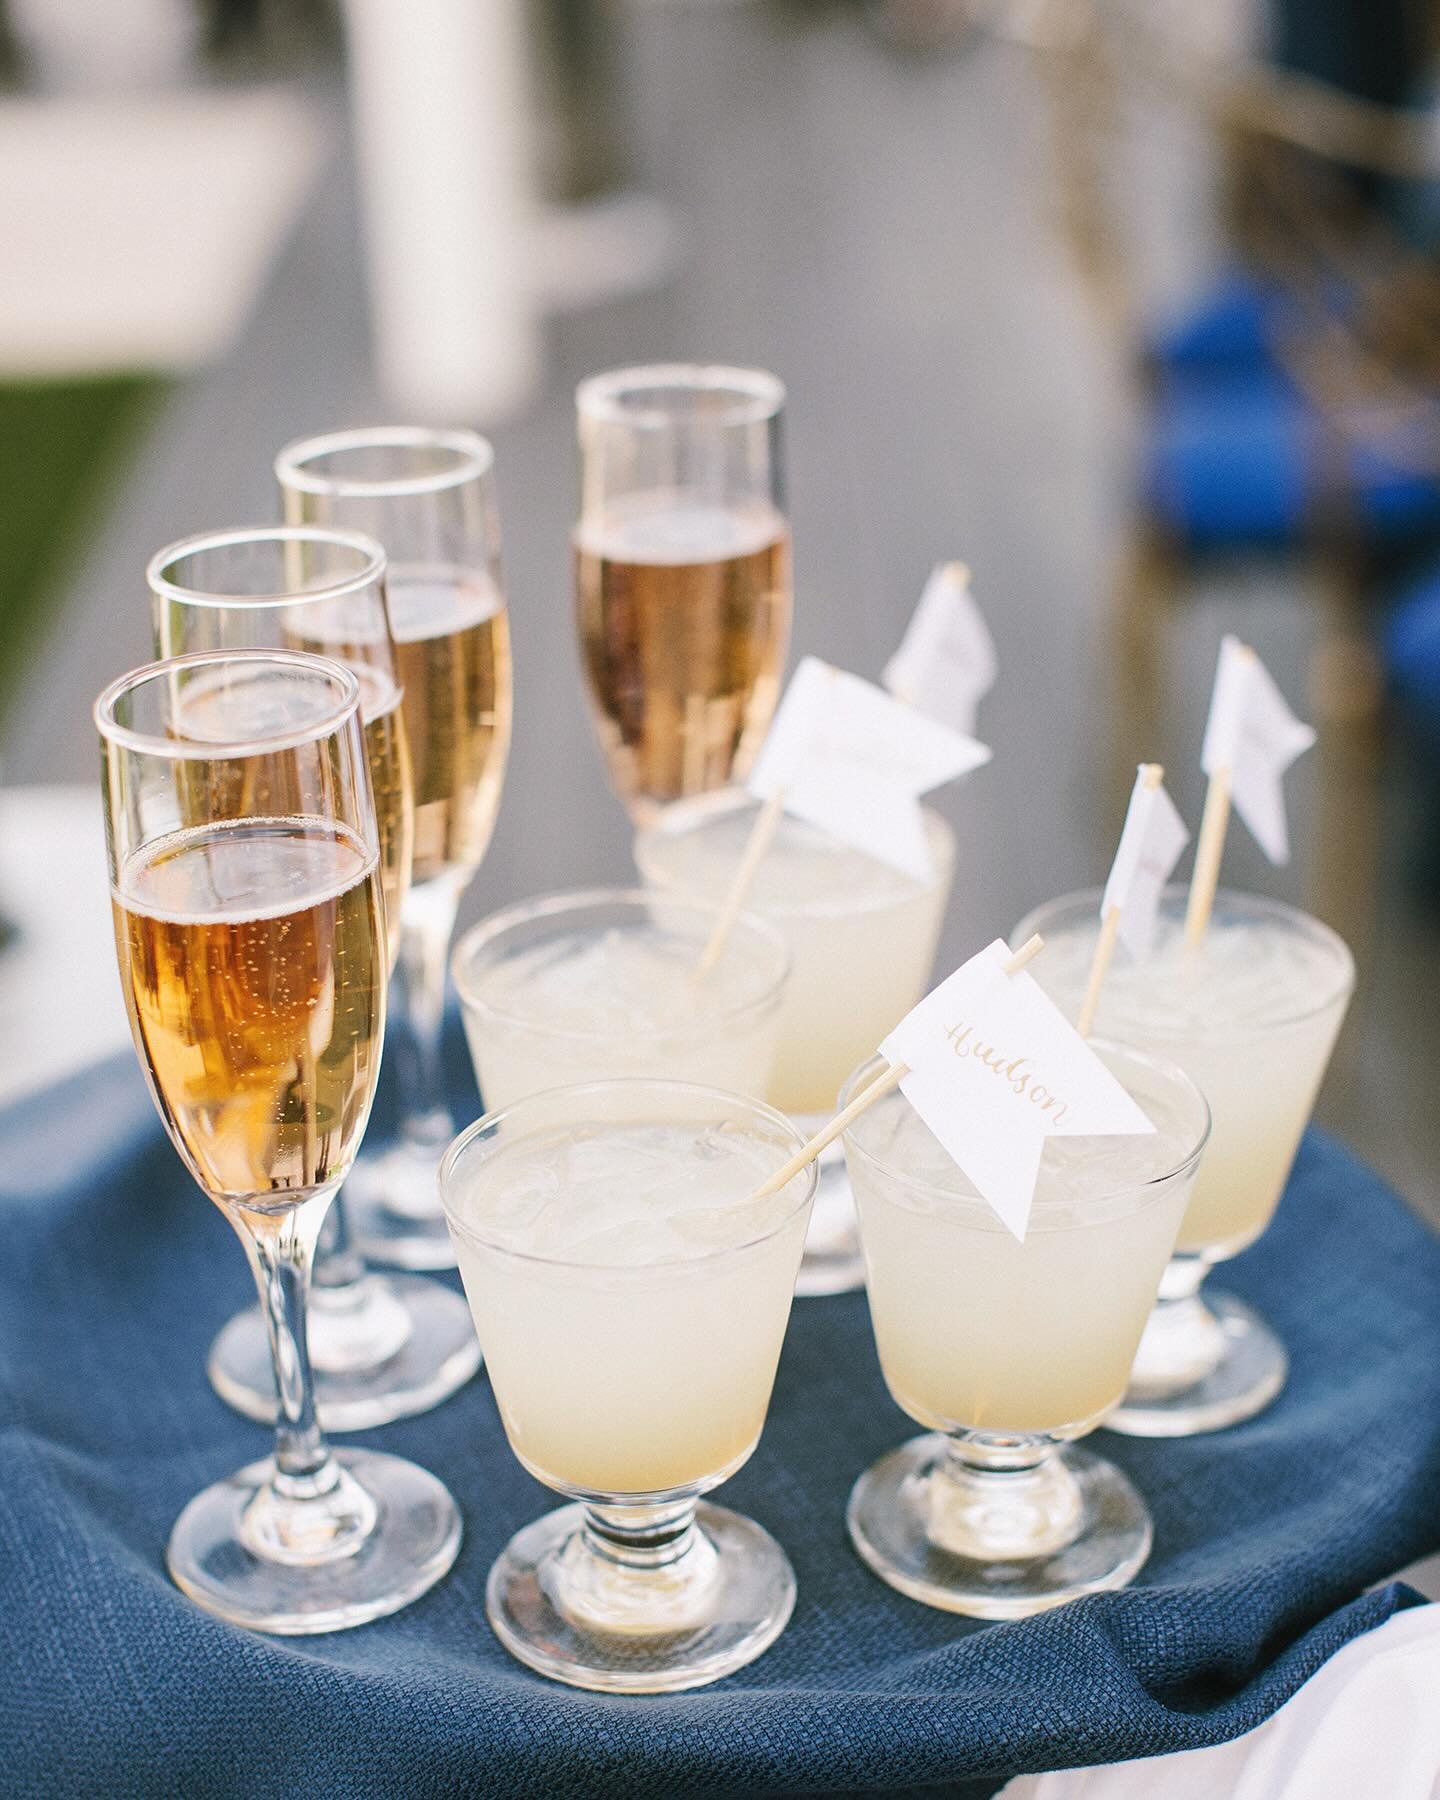 Welcome drinks! 🥂 A nice option to greet your guests with for your outdoor ceremony&mdash;why wait till cocktail hour? Also happy anniversary to the Hudsons!
.
.
.
.
.
Venue &amp; Catering: @sfyc1869 
Planner: Bella Concierge
Florist: @poppyspetalwo